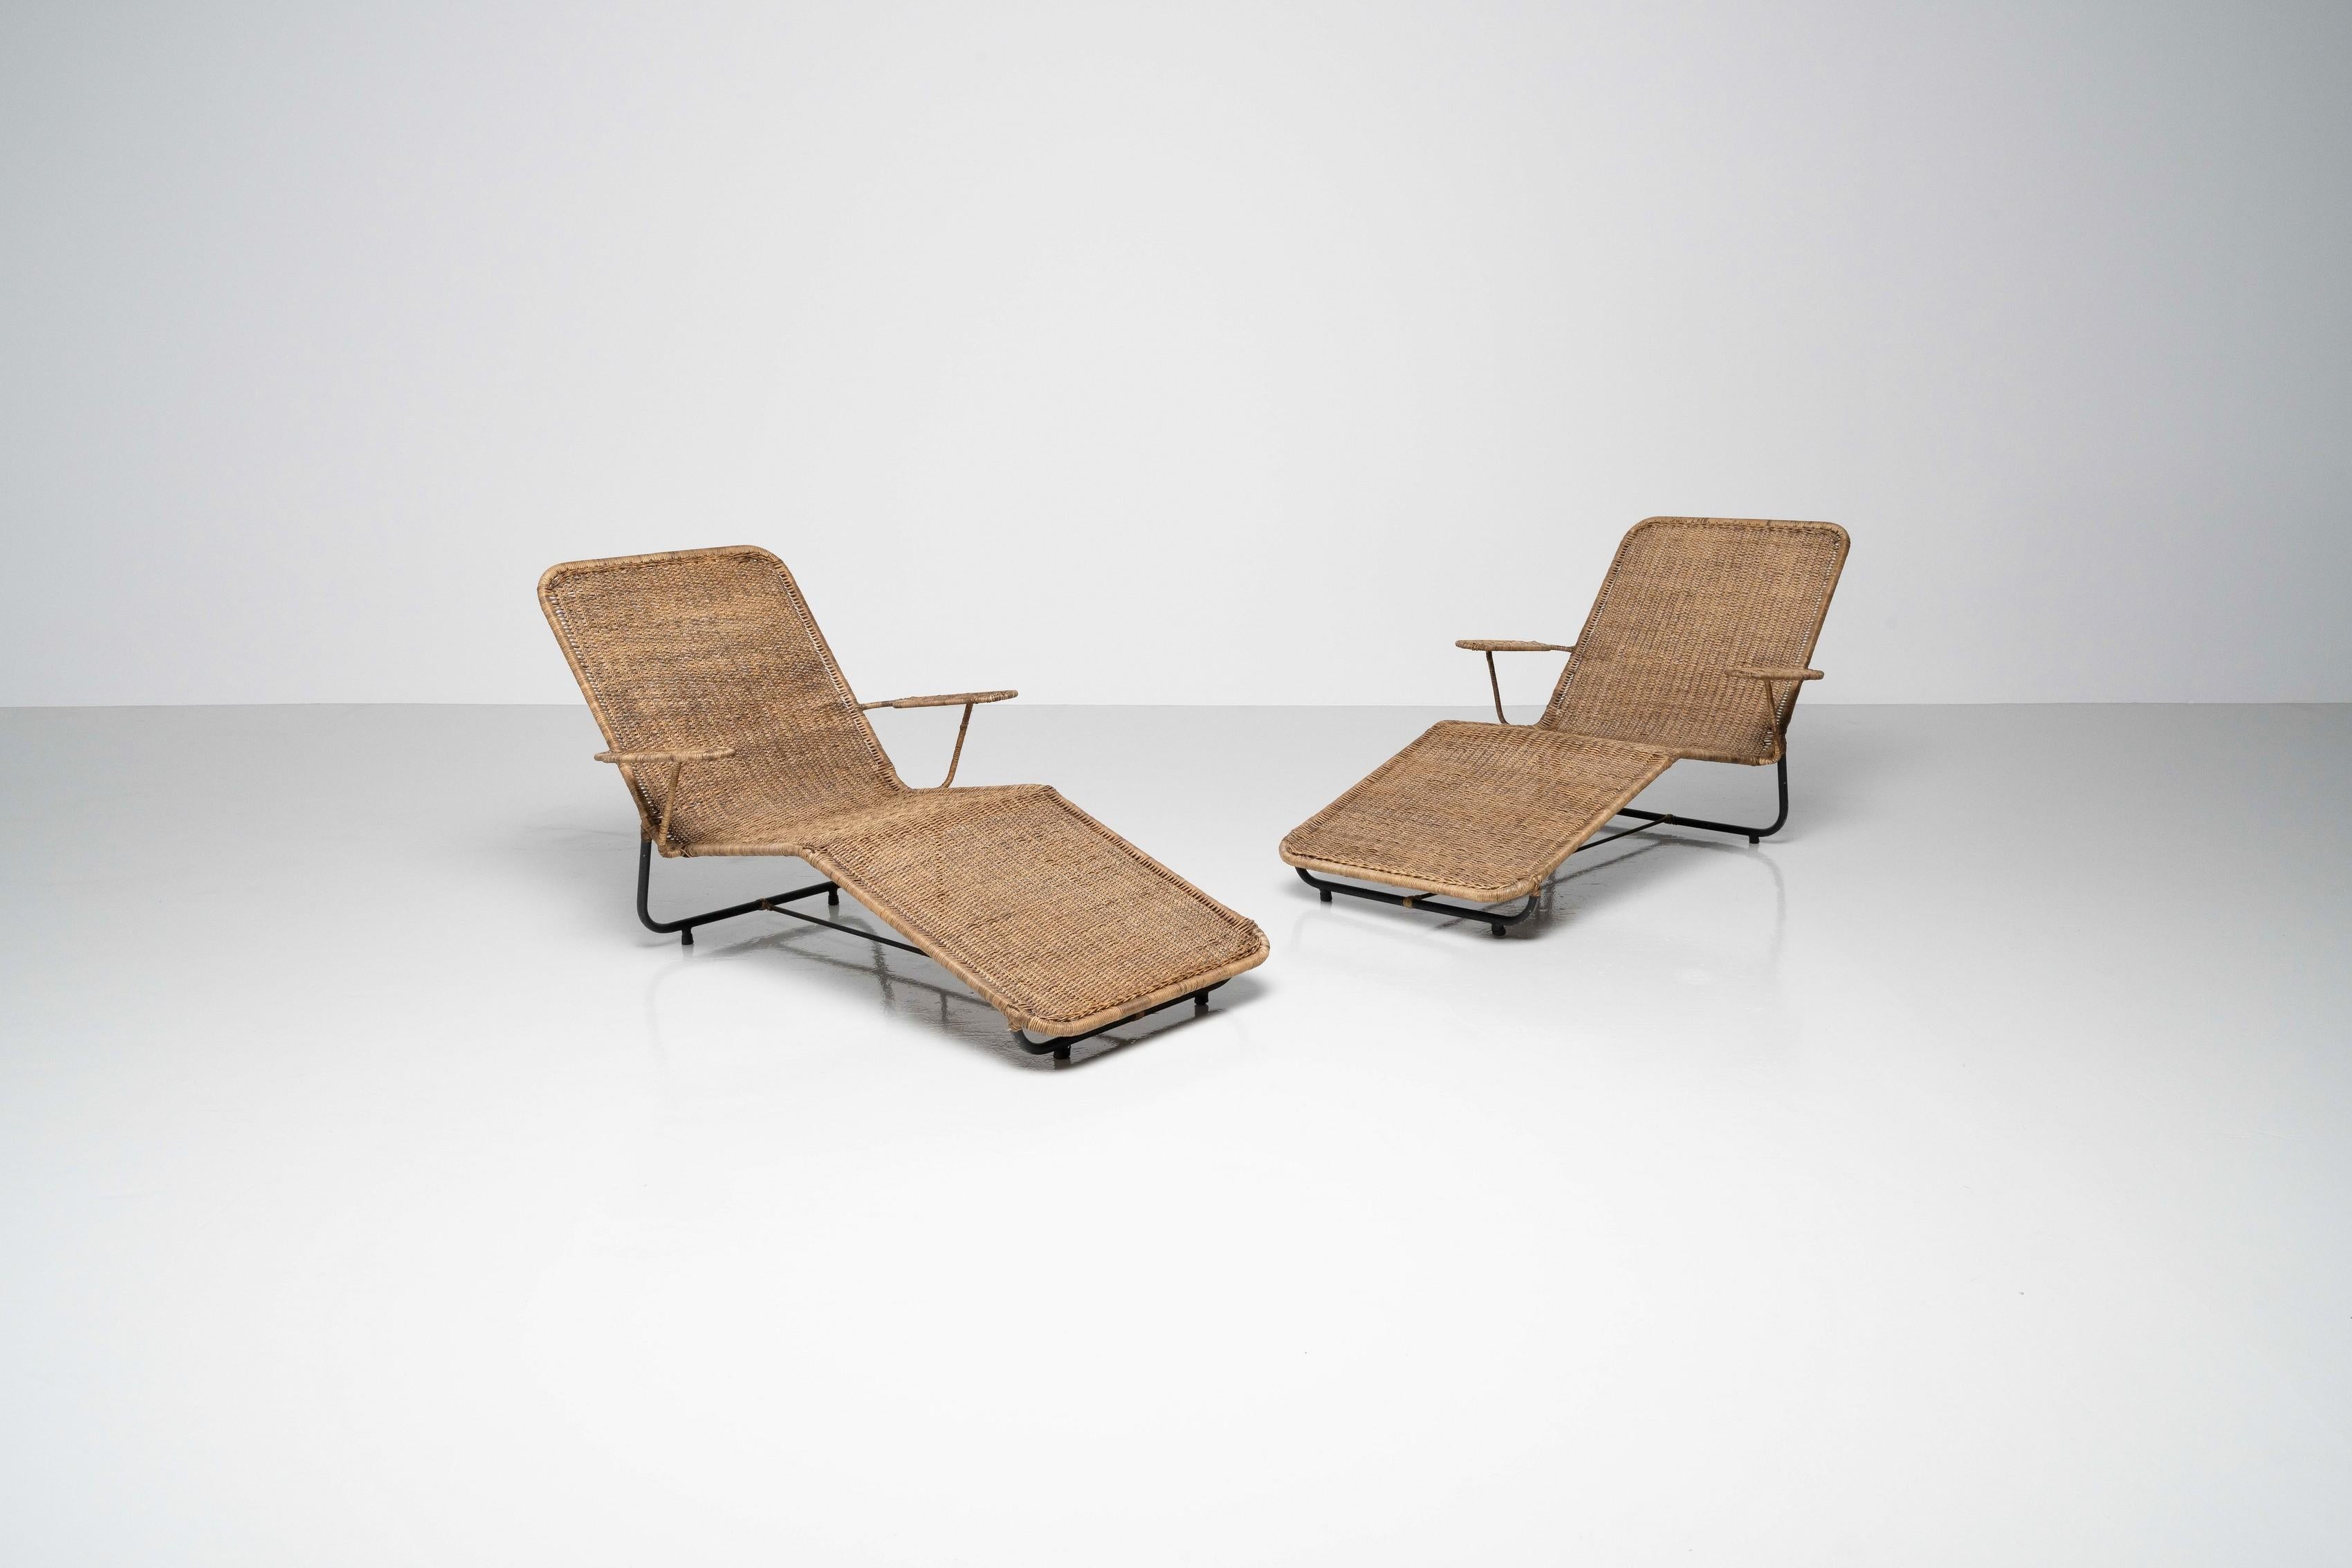 A beautiful pair of lounge chairs in rattan by Carlo Hauner and Martin Eisler, made by Forma Móveis in Brazil in 1955. The chairs are in fully original condition and have never been seperated. The overall patina looks fantastic, and the chairs have